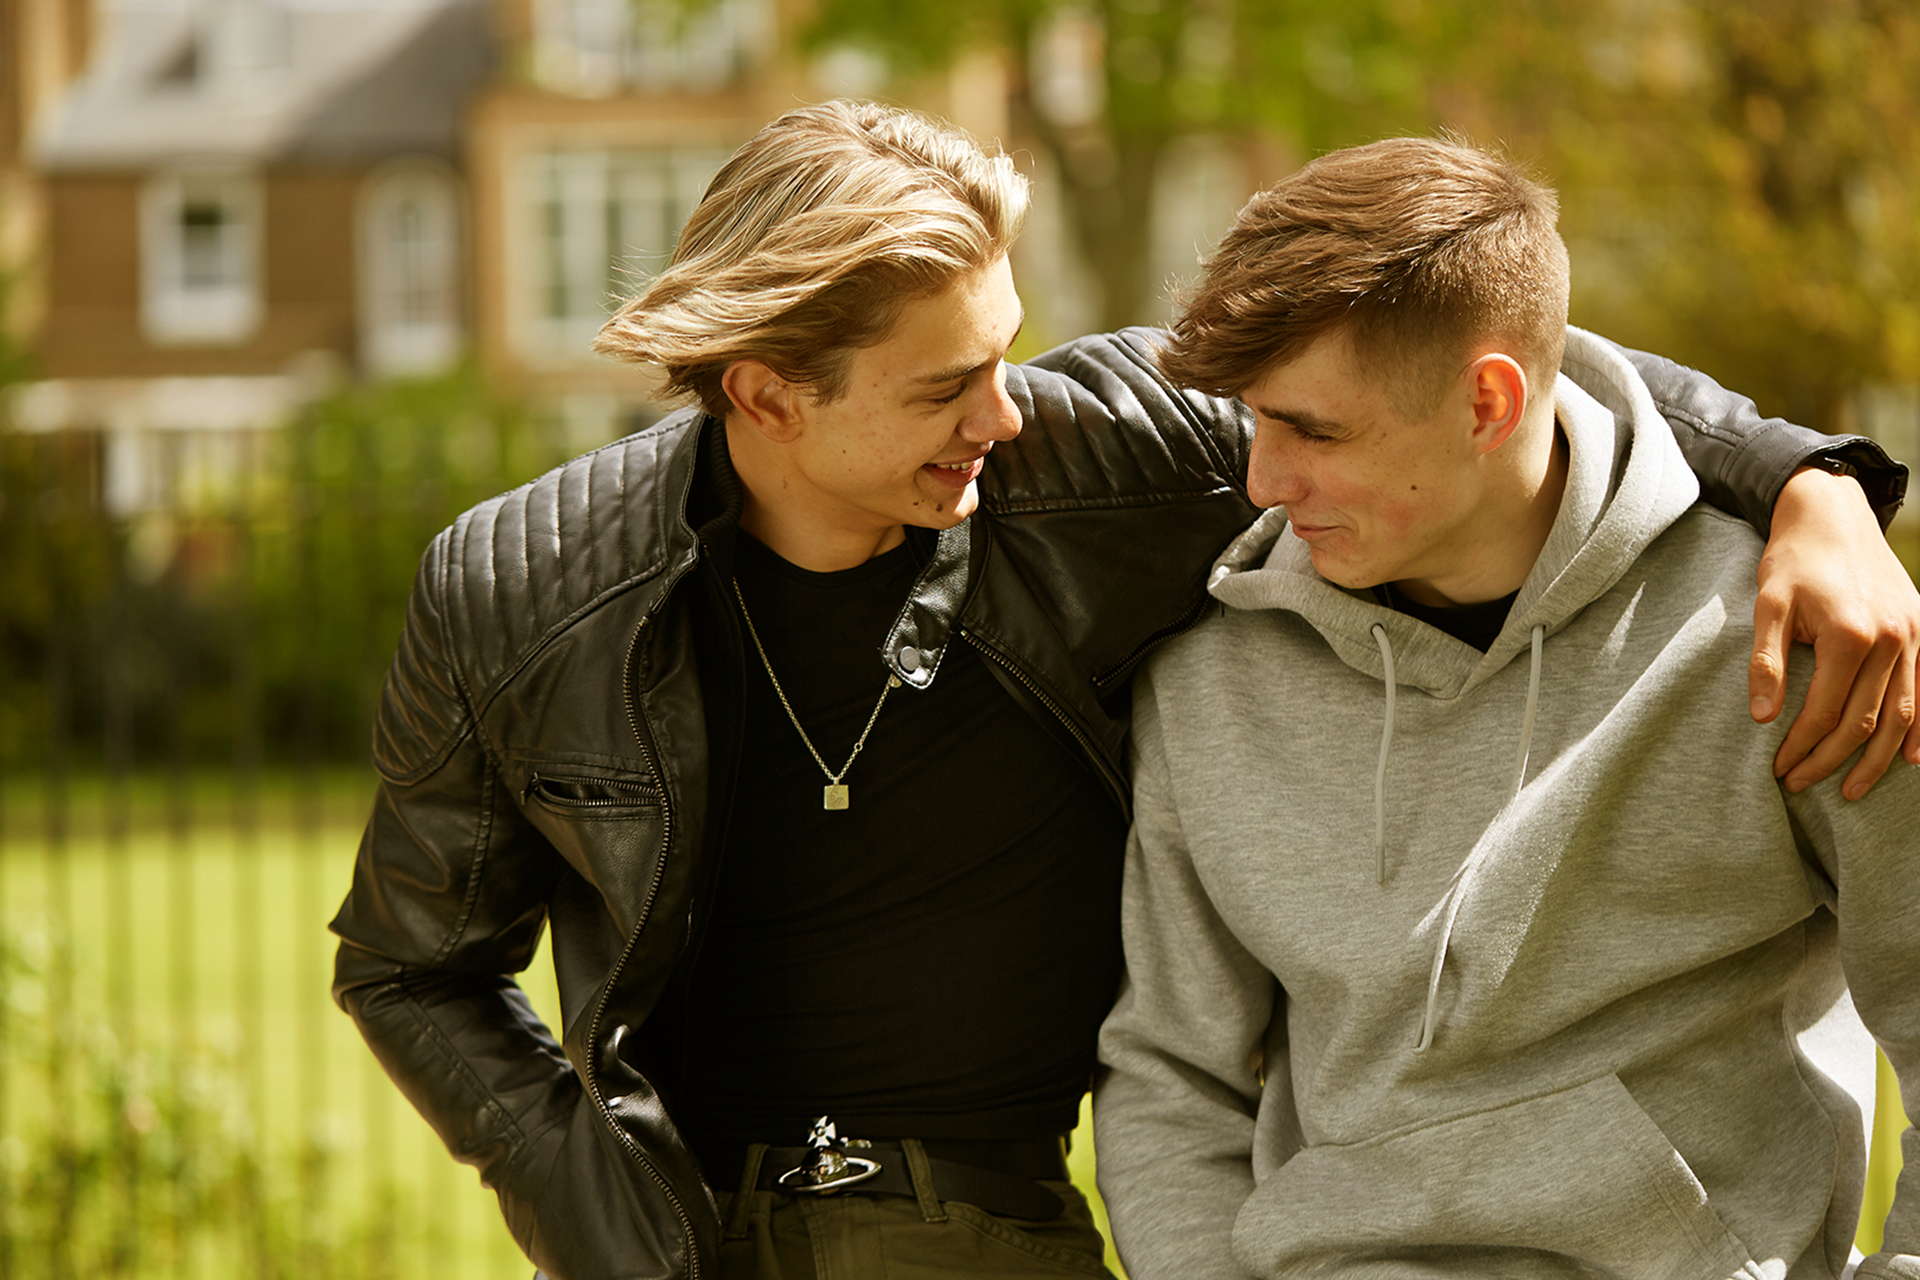 Two boys sitting in the park with their arms around each other, smiling and looking at each other.